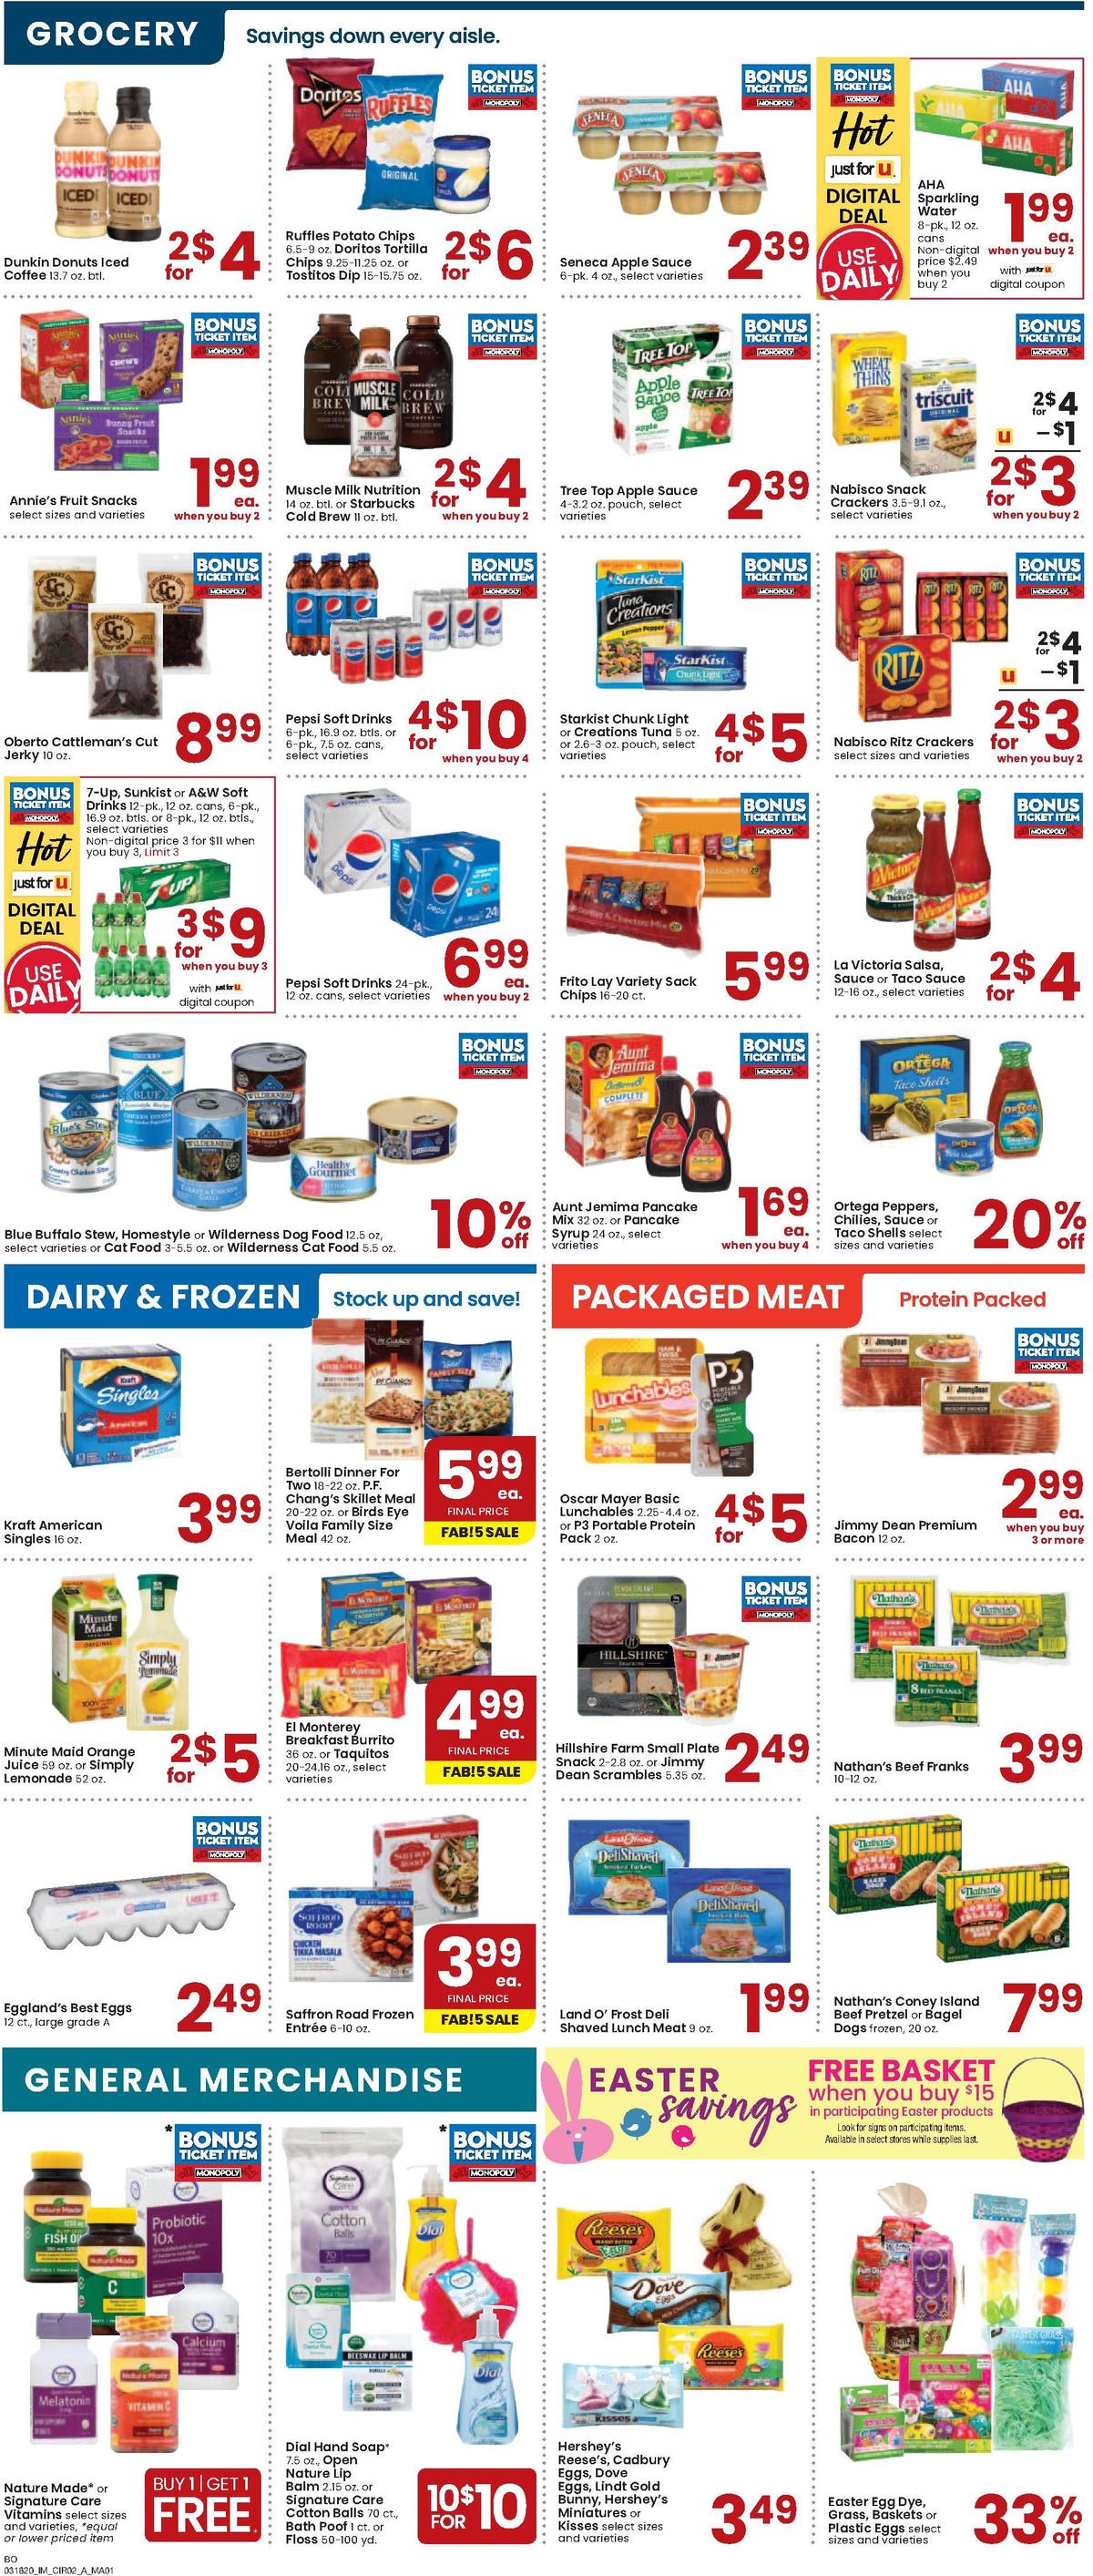 Albertsons Weekly Ad from March 18